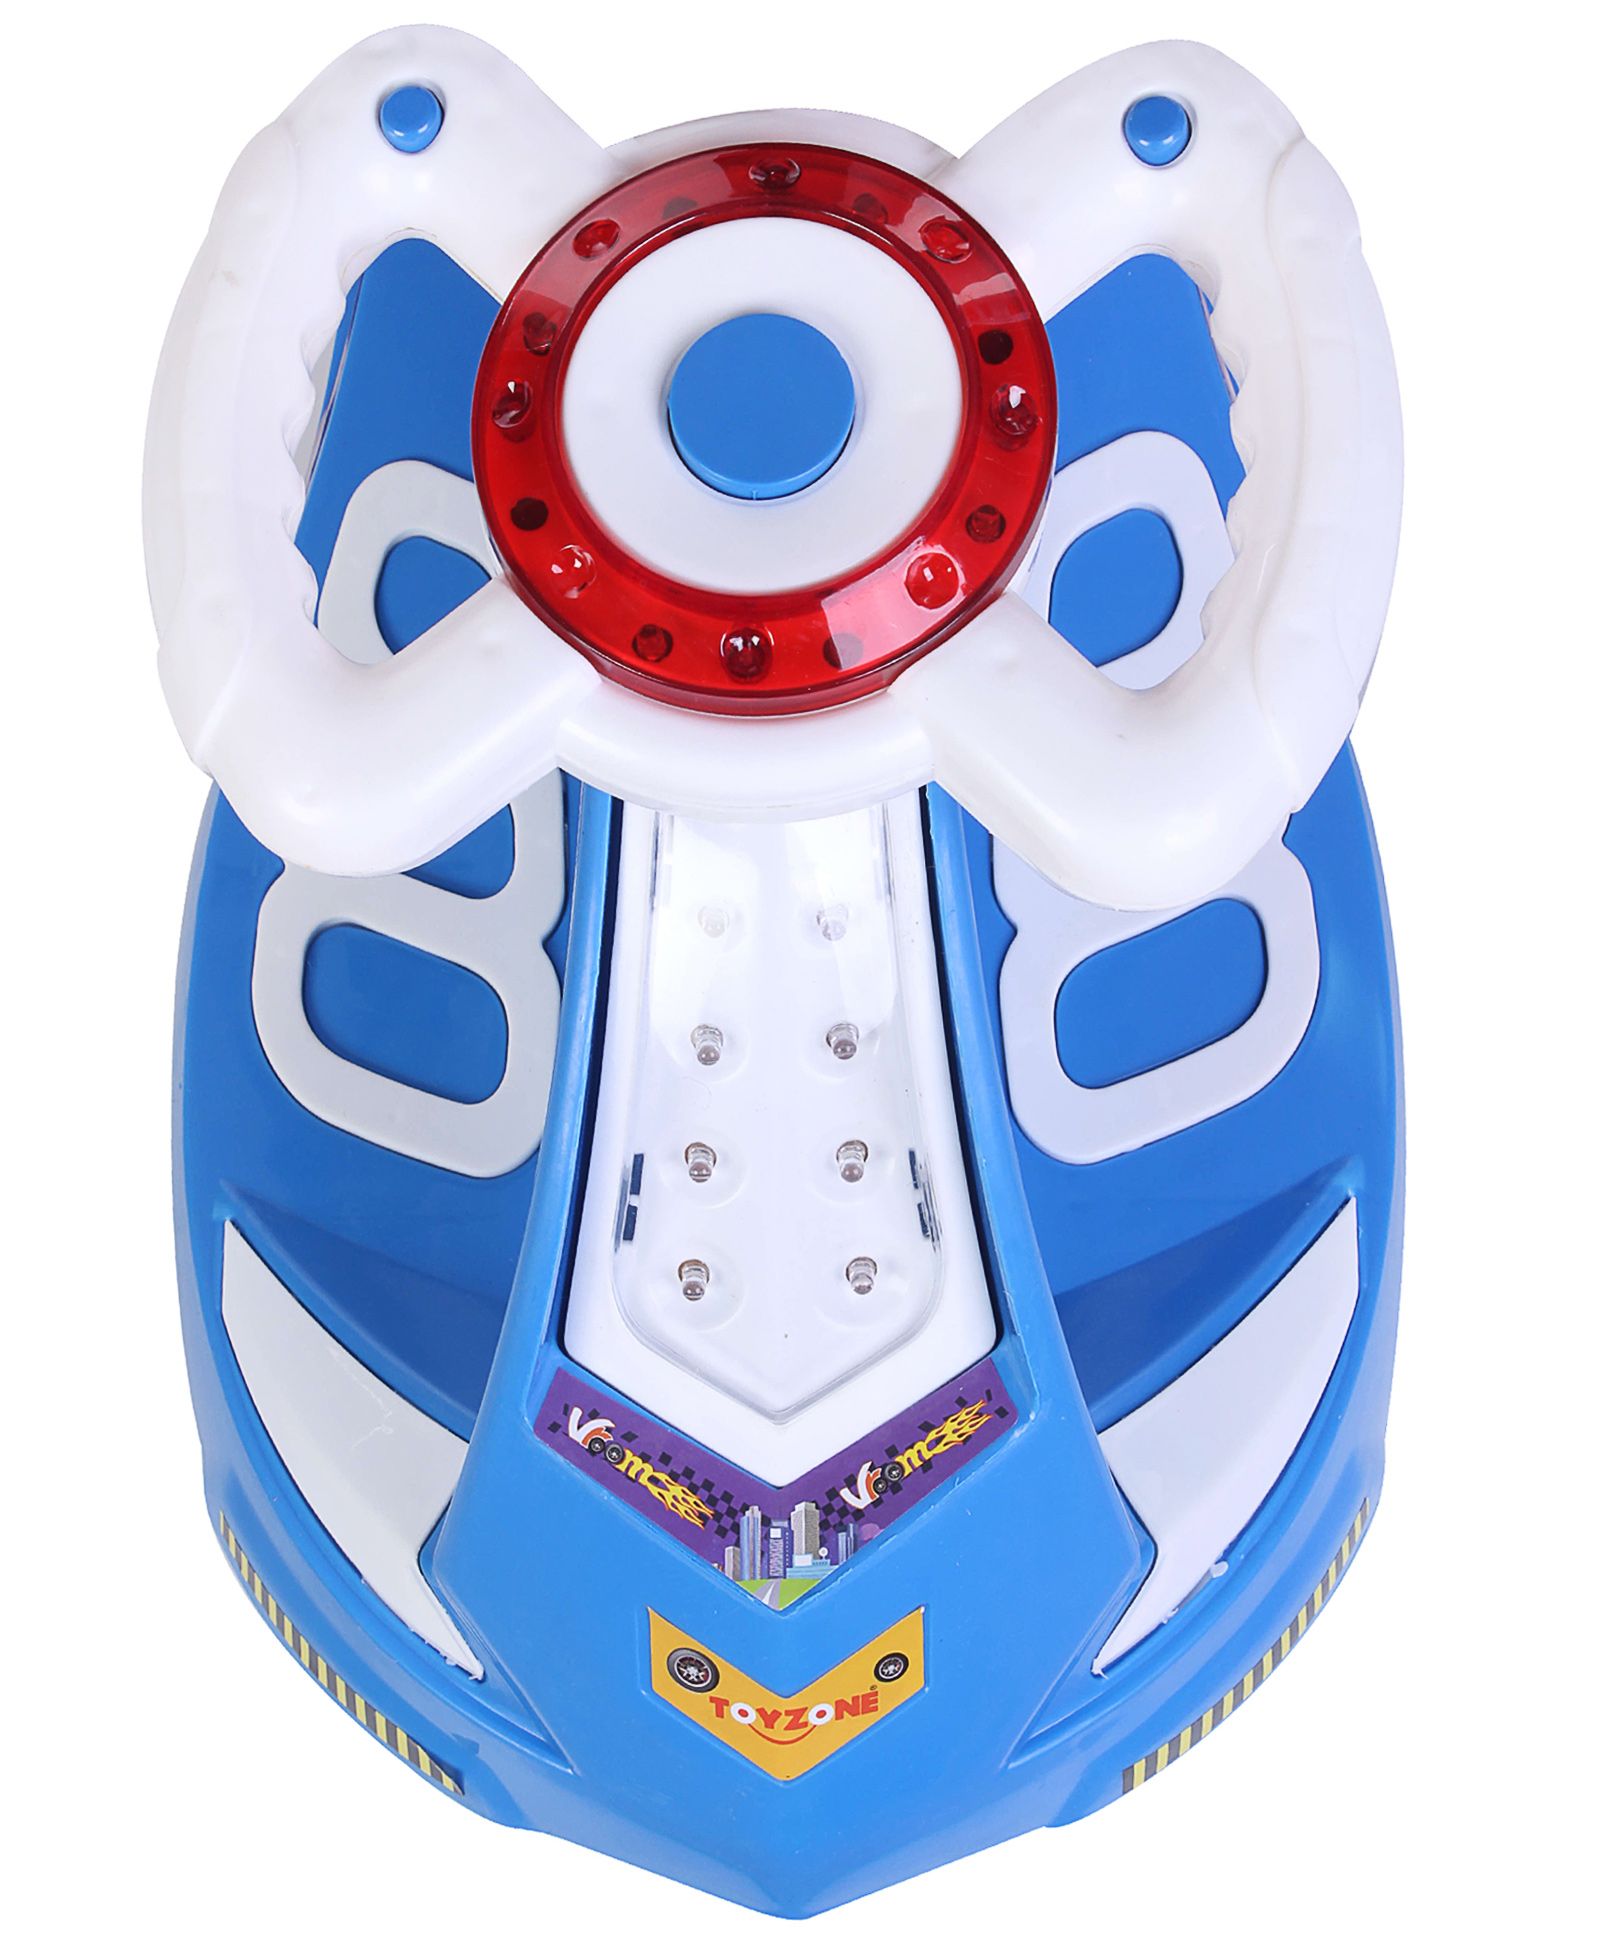 Toyzone Twister Magic Car City - Blue And White